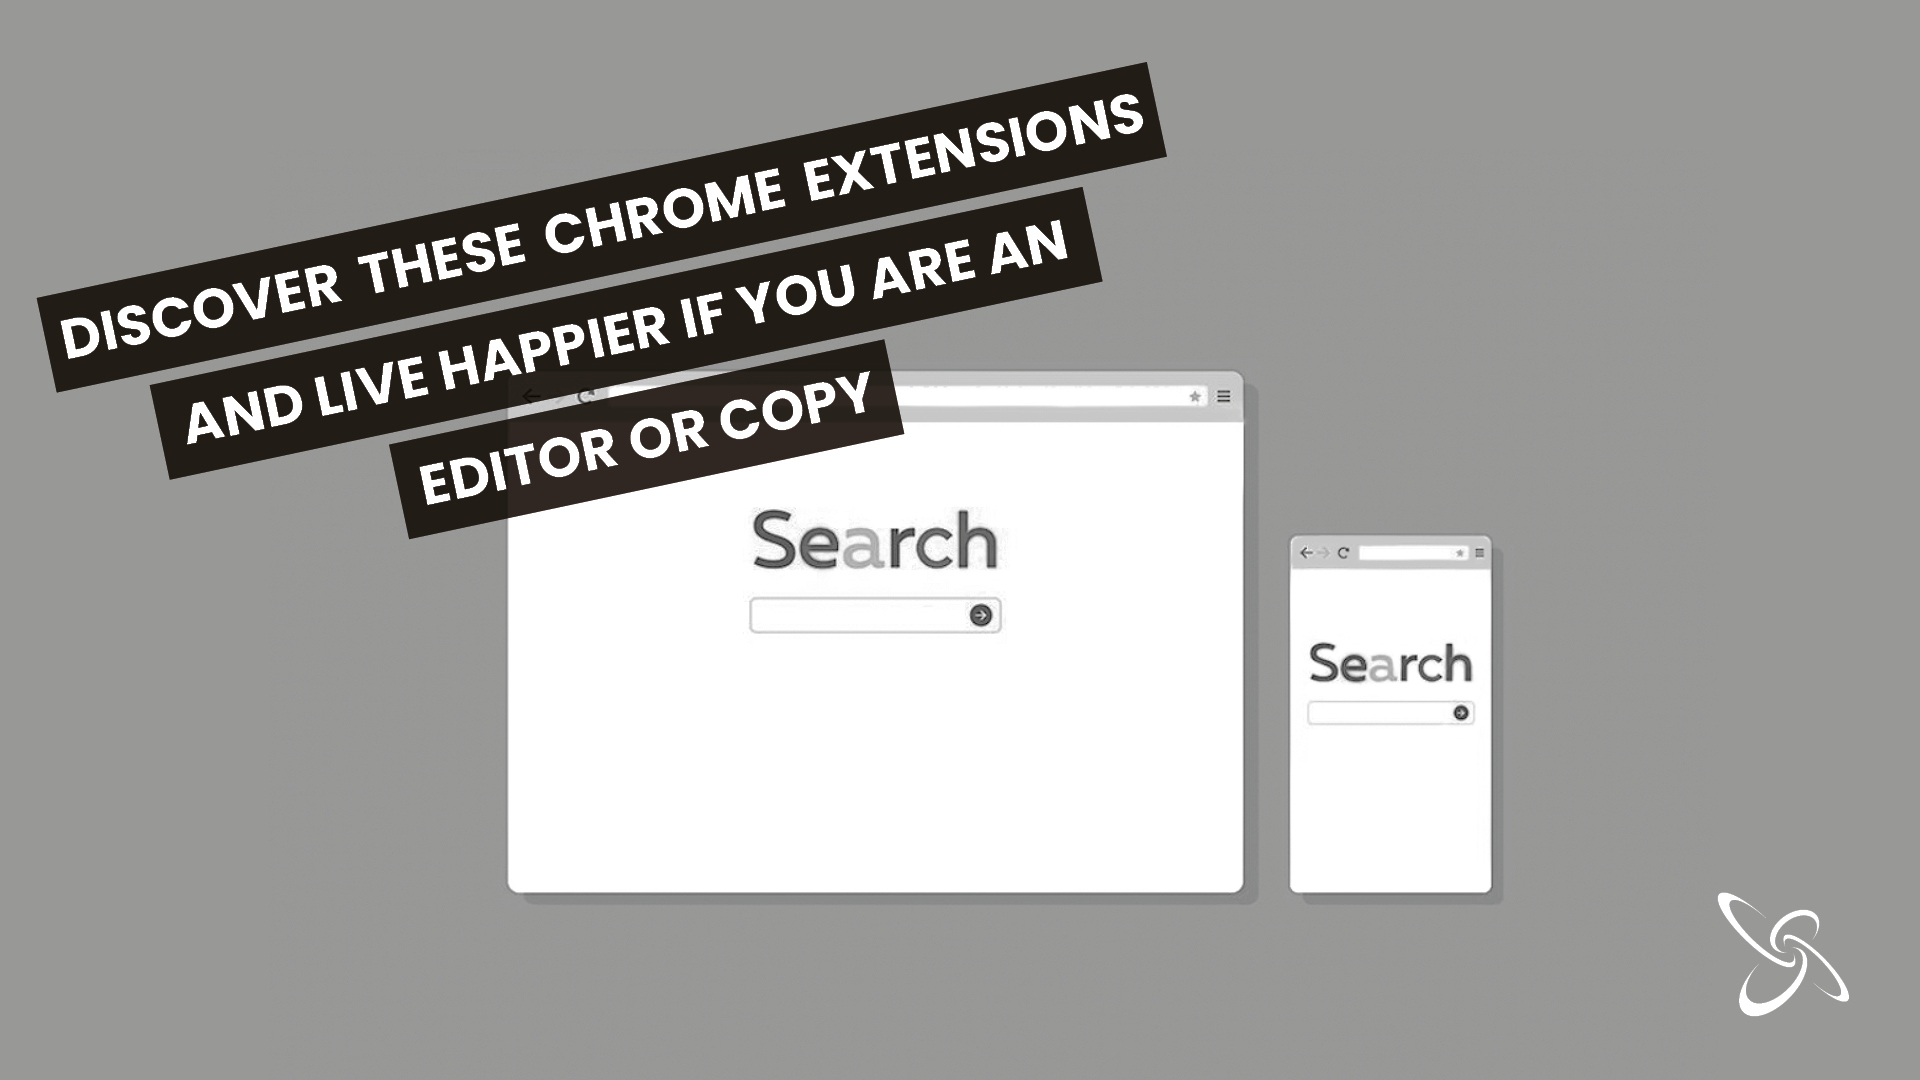 Discover these Chrome extensions and live happier if you are a editor or copy